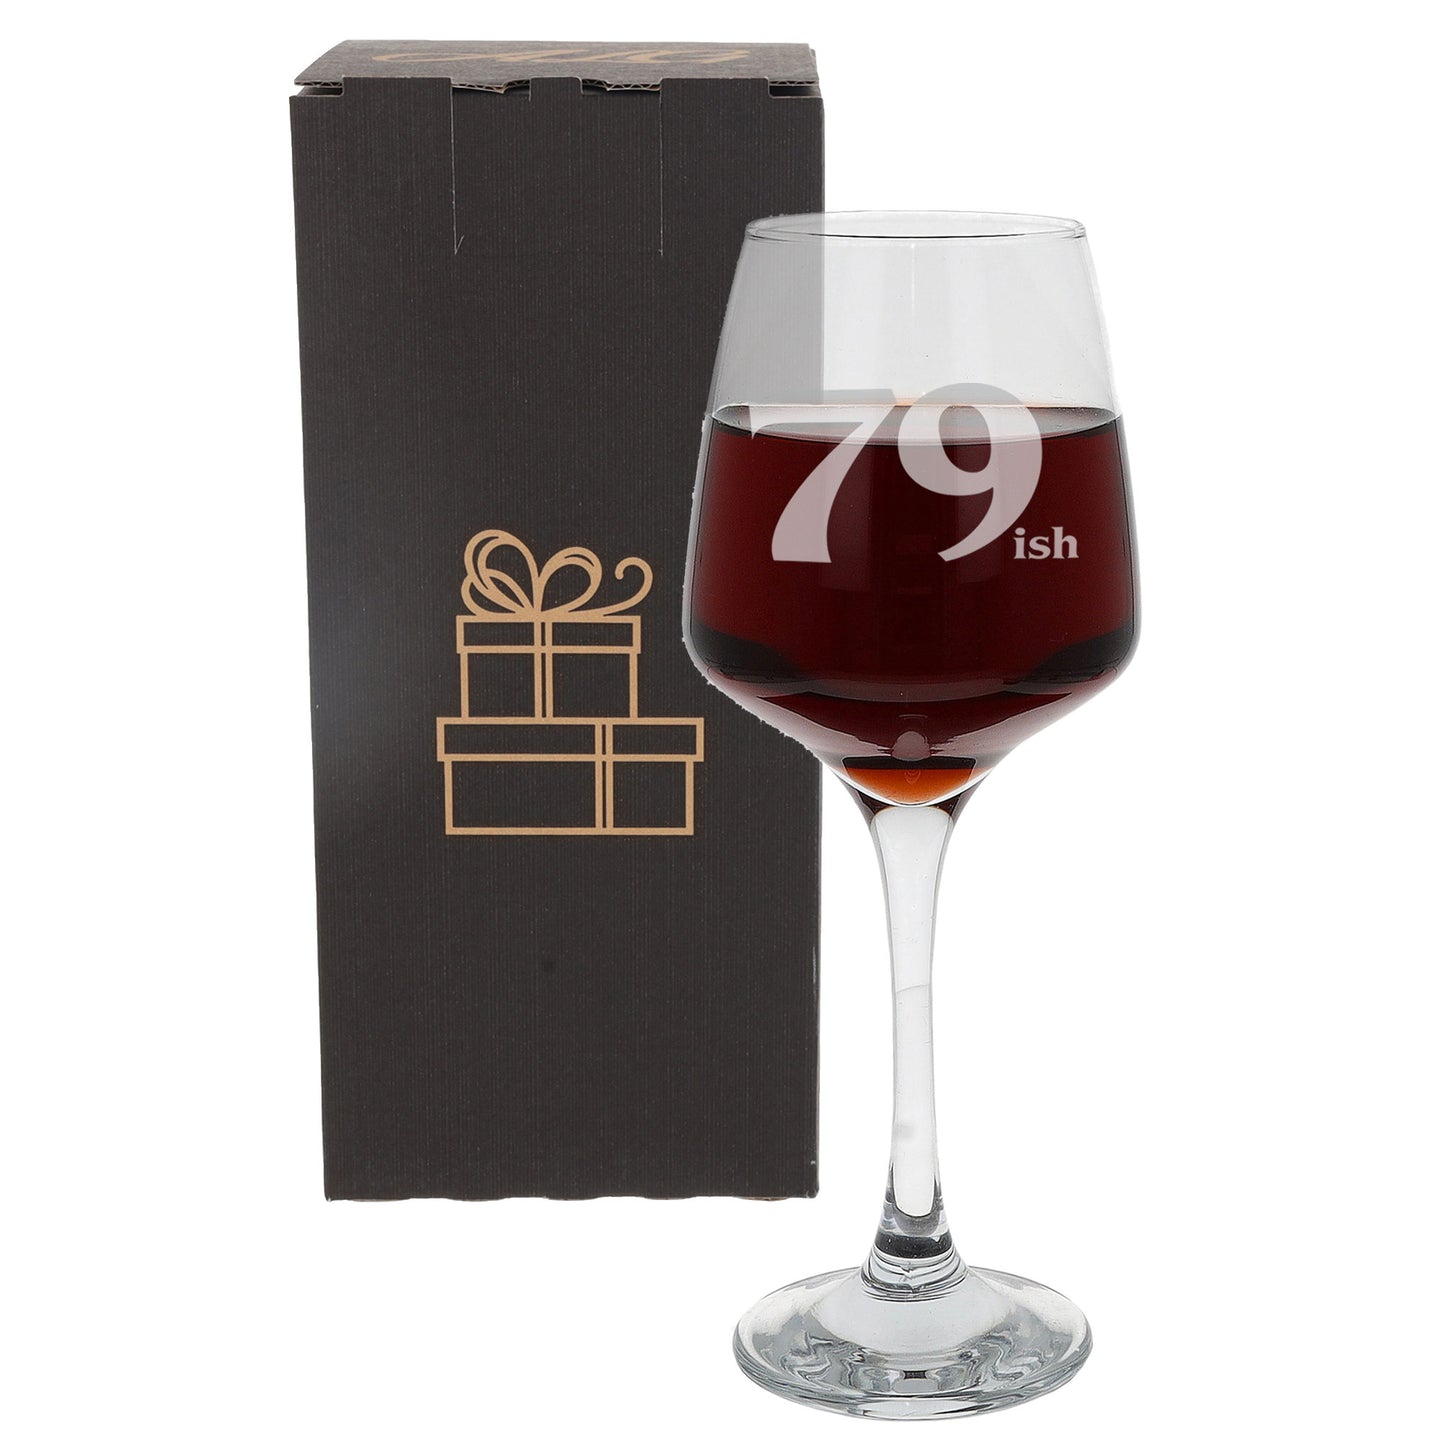 79ish Wine Glass and/or Coaster Set  - Always Looking Good -   